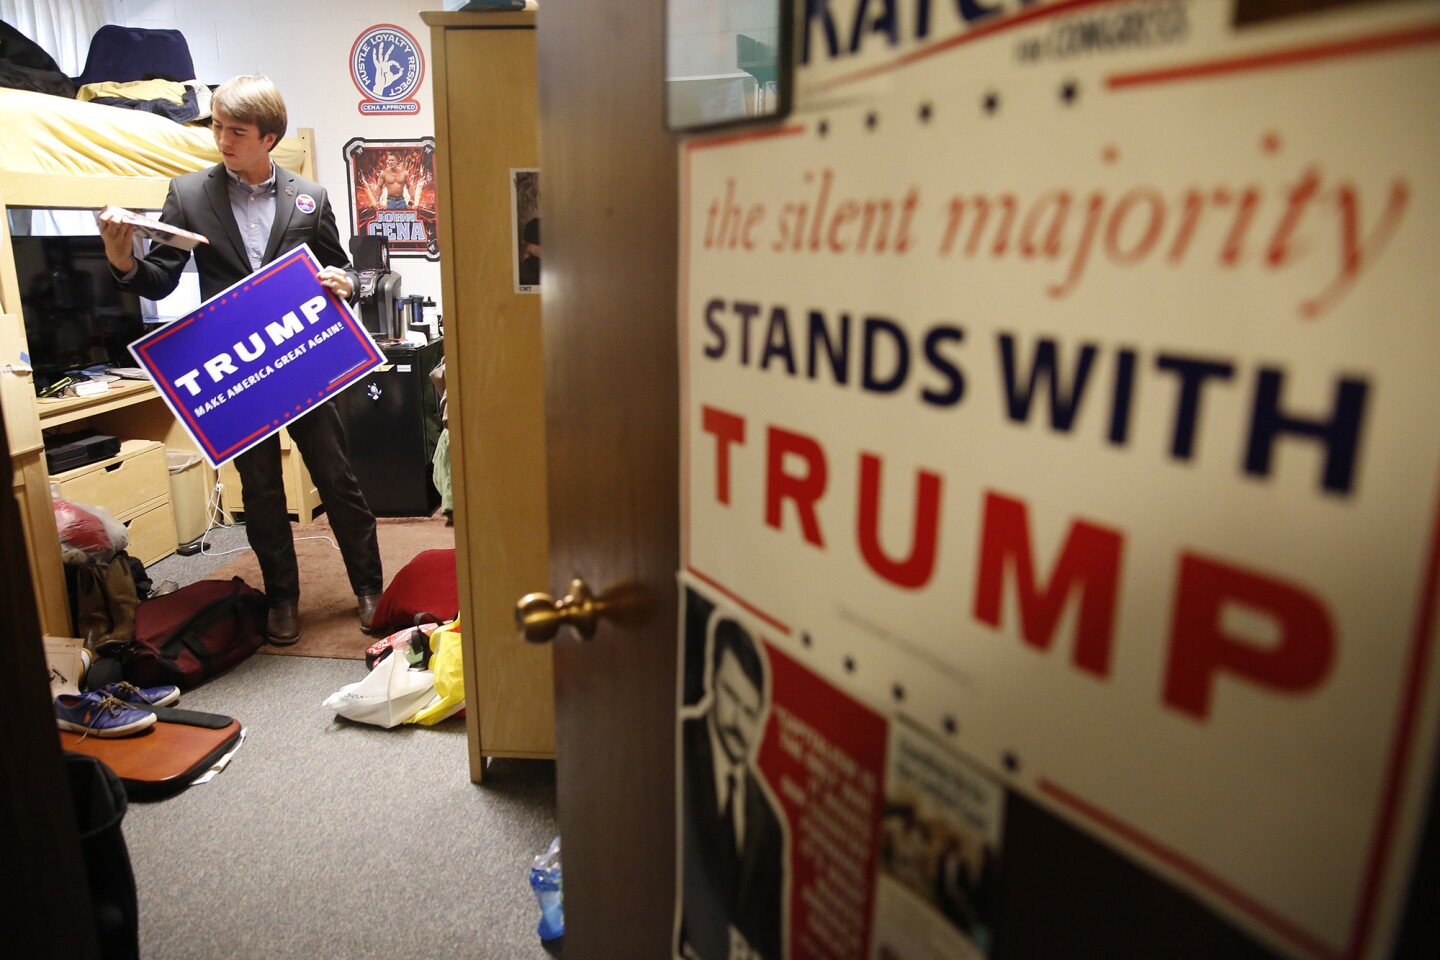 Donald Trump supporter and Westmont College student Jake Lopez grabs a Trump campaign poster in his dorm room to take out on campus in Montecito, Calif.